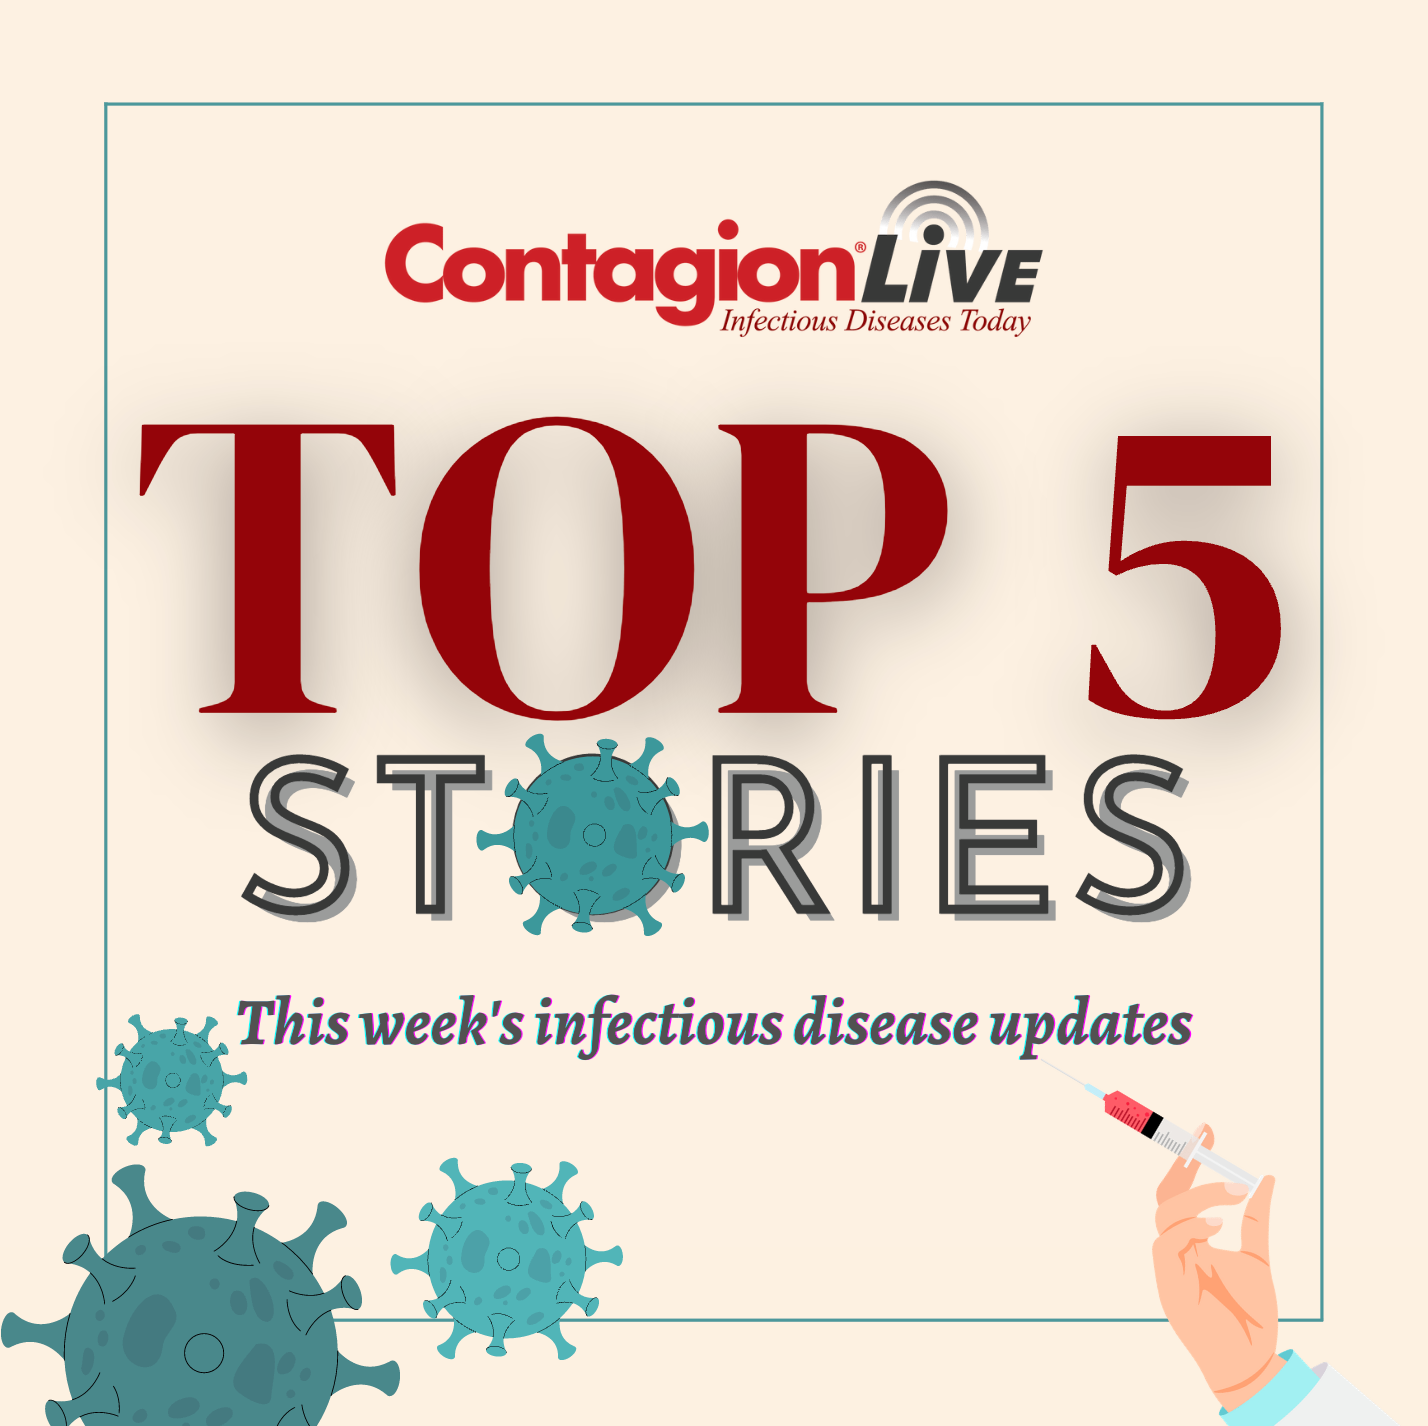 Fruit Recalls, New Vaccines, and More: The Week's Top Infectious Disease Stories 